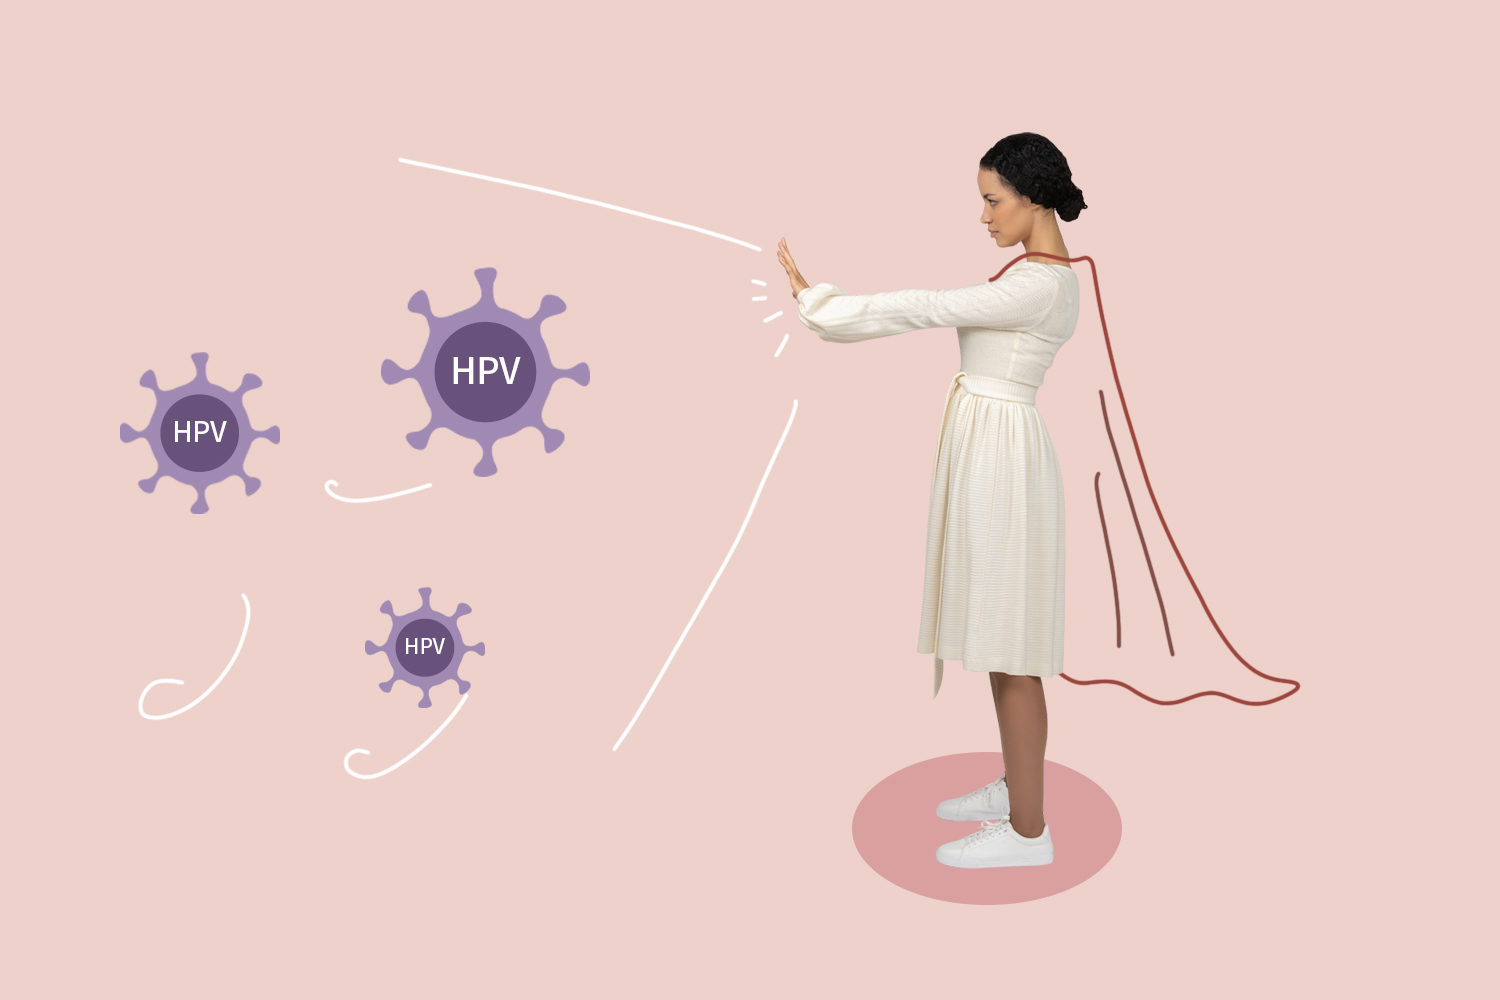 Hpv virus with pregnancy Hpv virus and pregnant